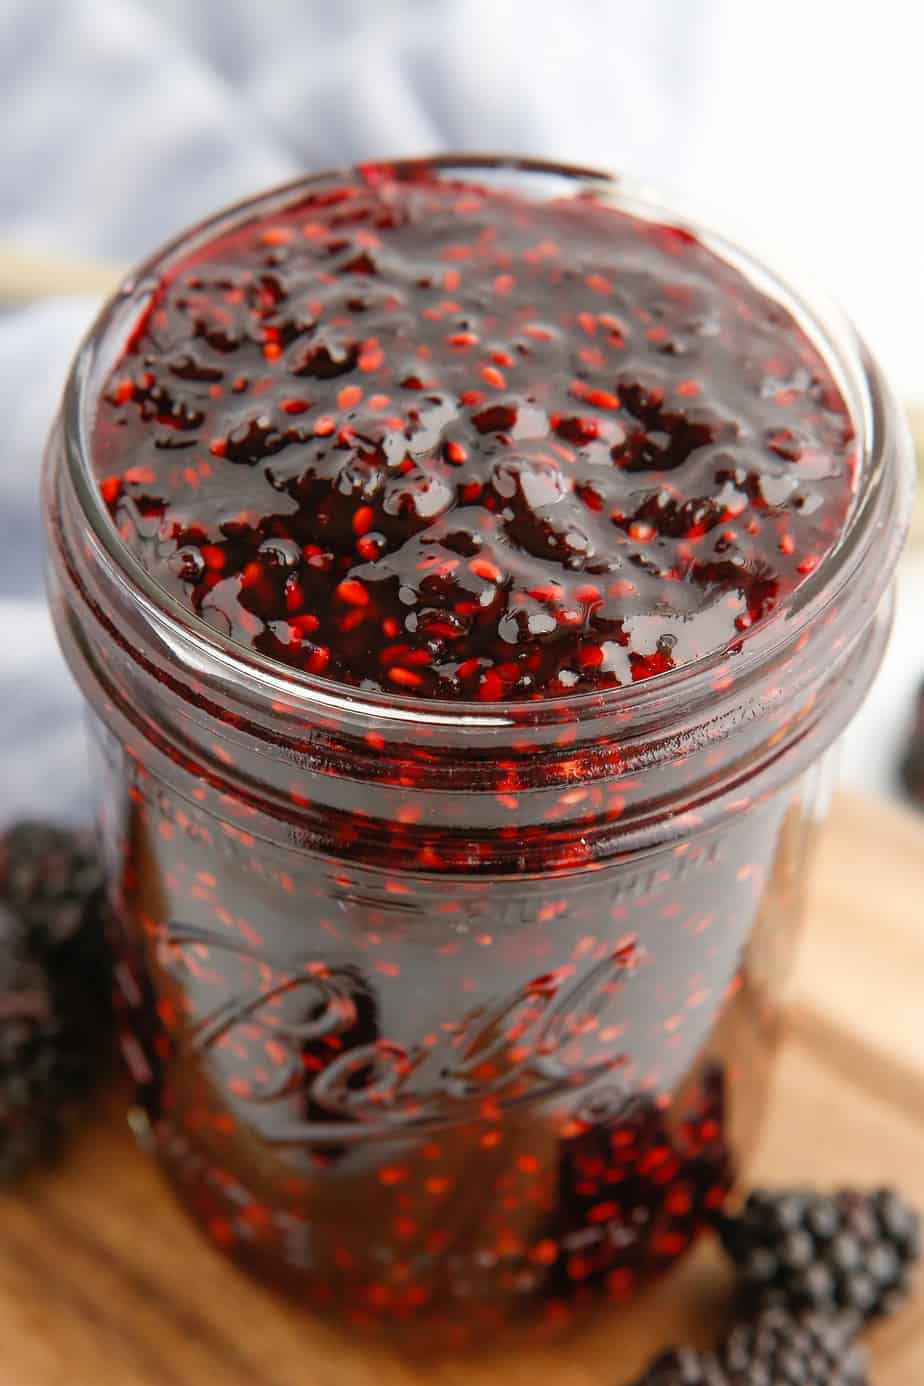 blackberry jam filling a canning jar open from overhead